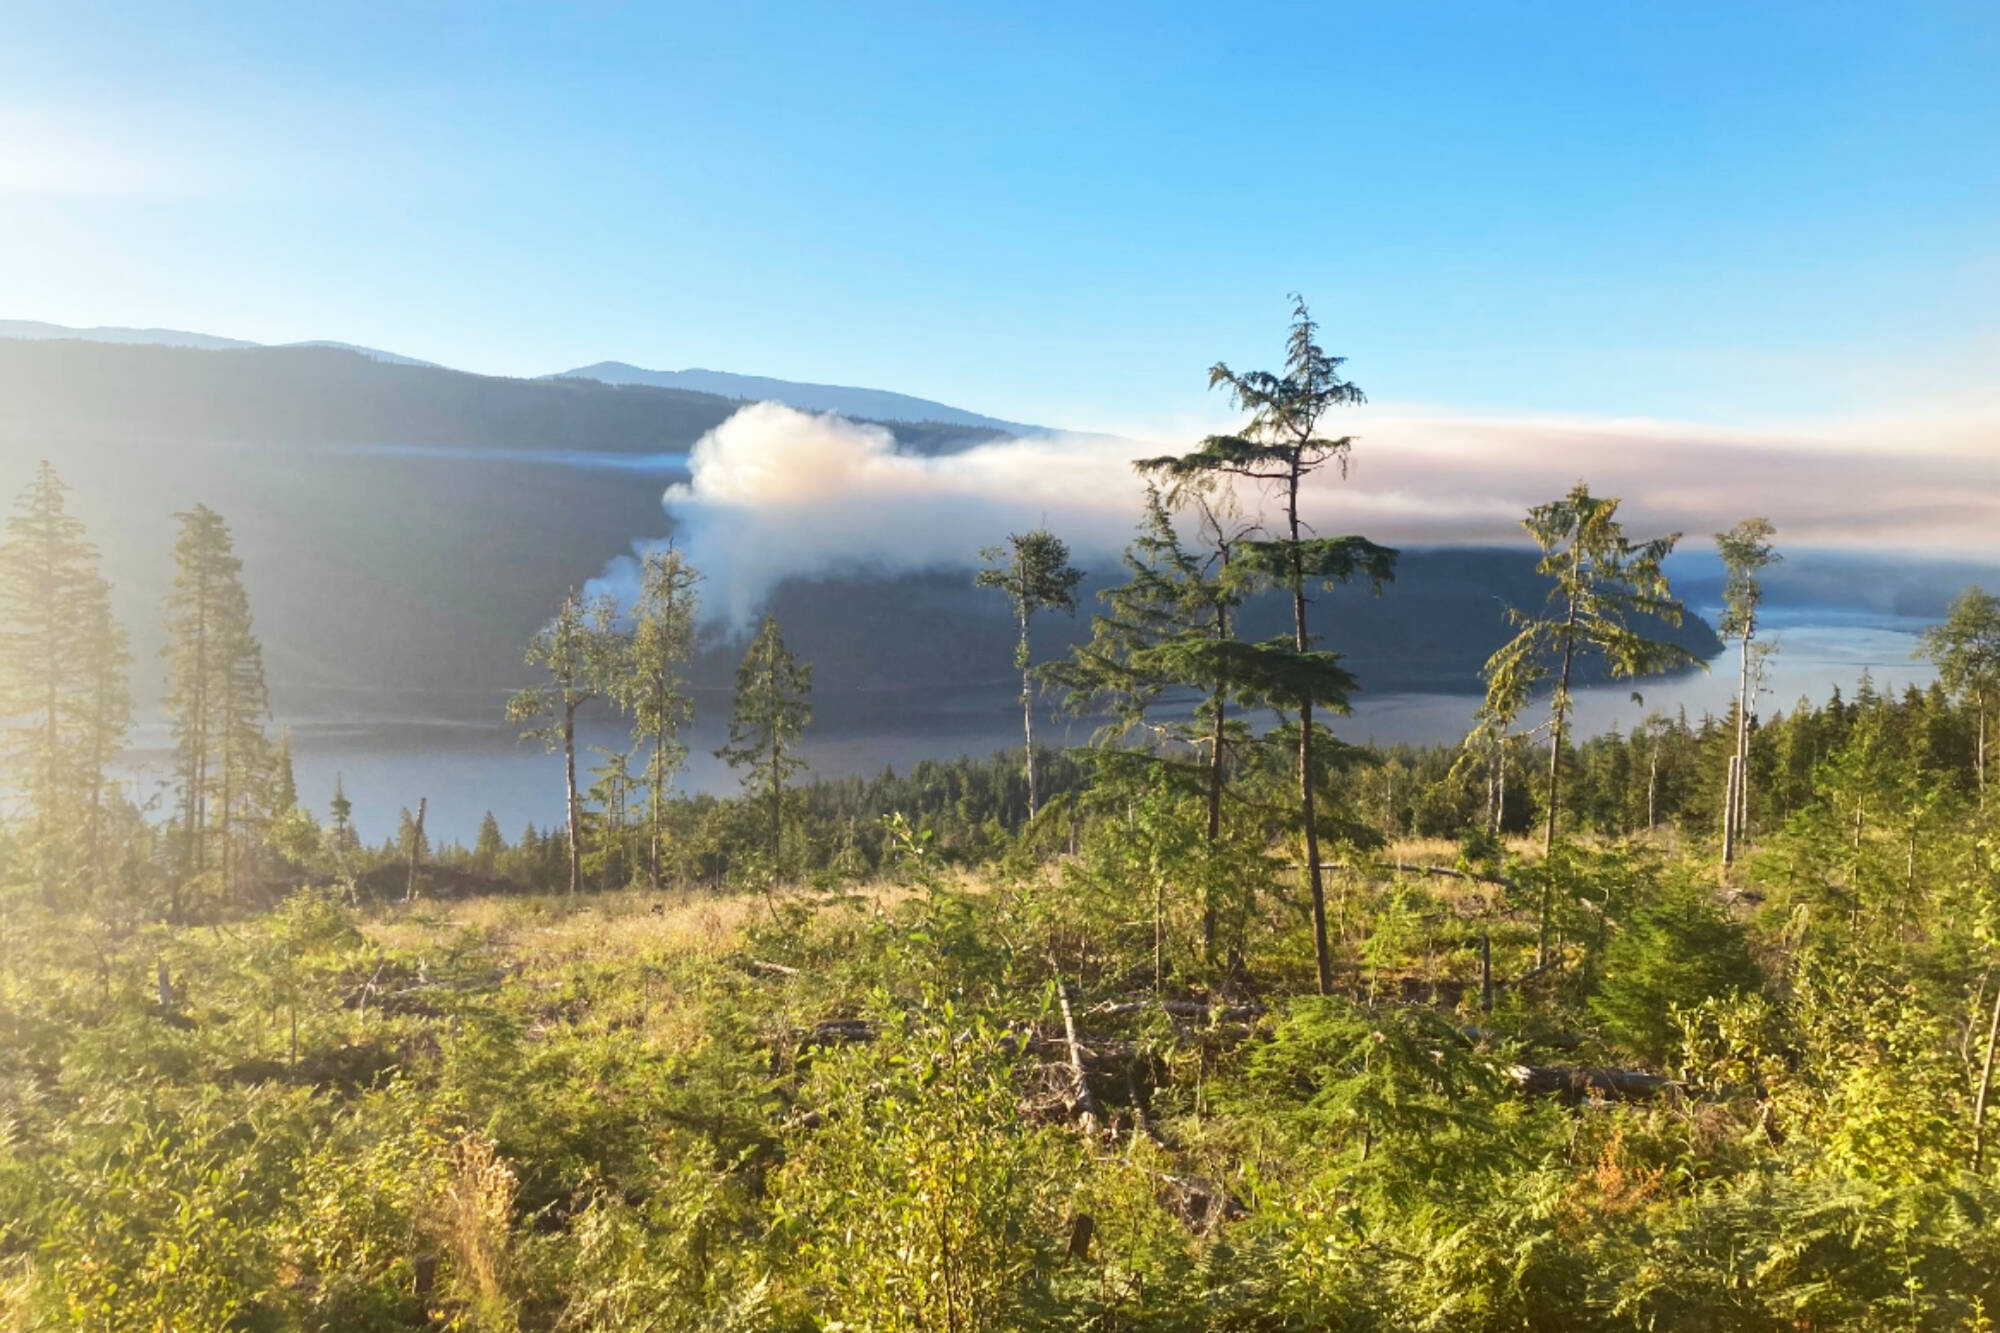 The BC Wildfire Service is responding to the Mount Grice-Hutchinson wildfire, about 20 kilometres south of Seymour Arm, on Thursday, Aug. 18, 2022. (BC Wildfire Service photo)